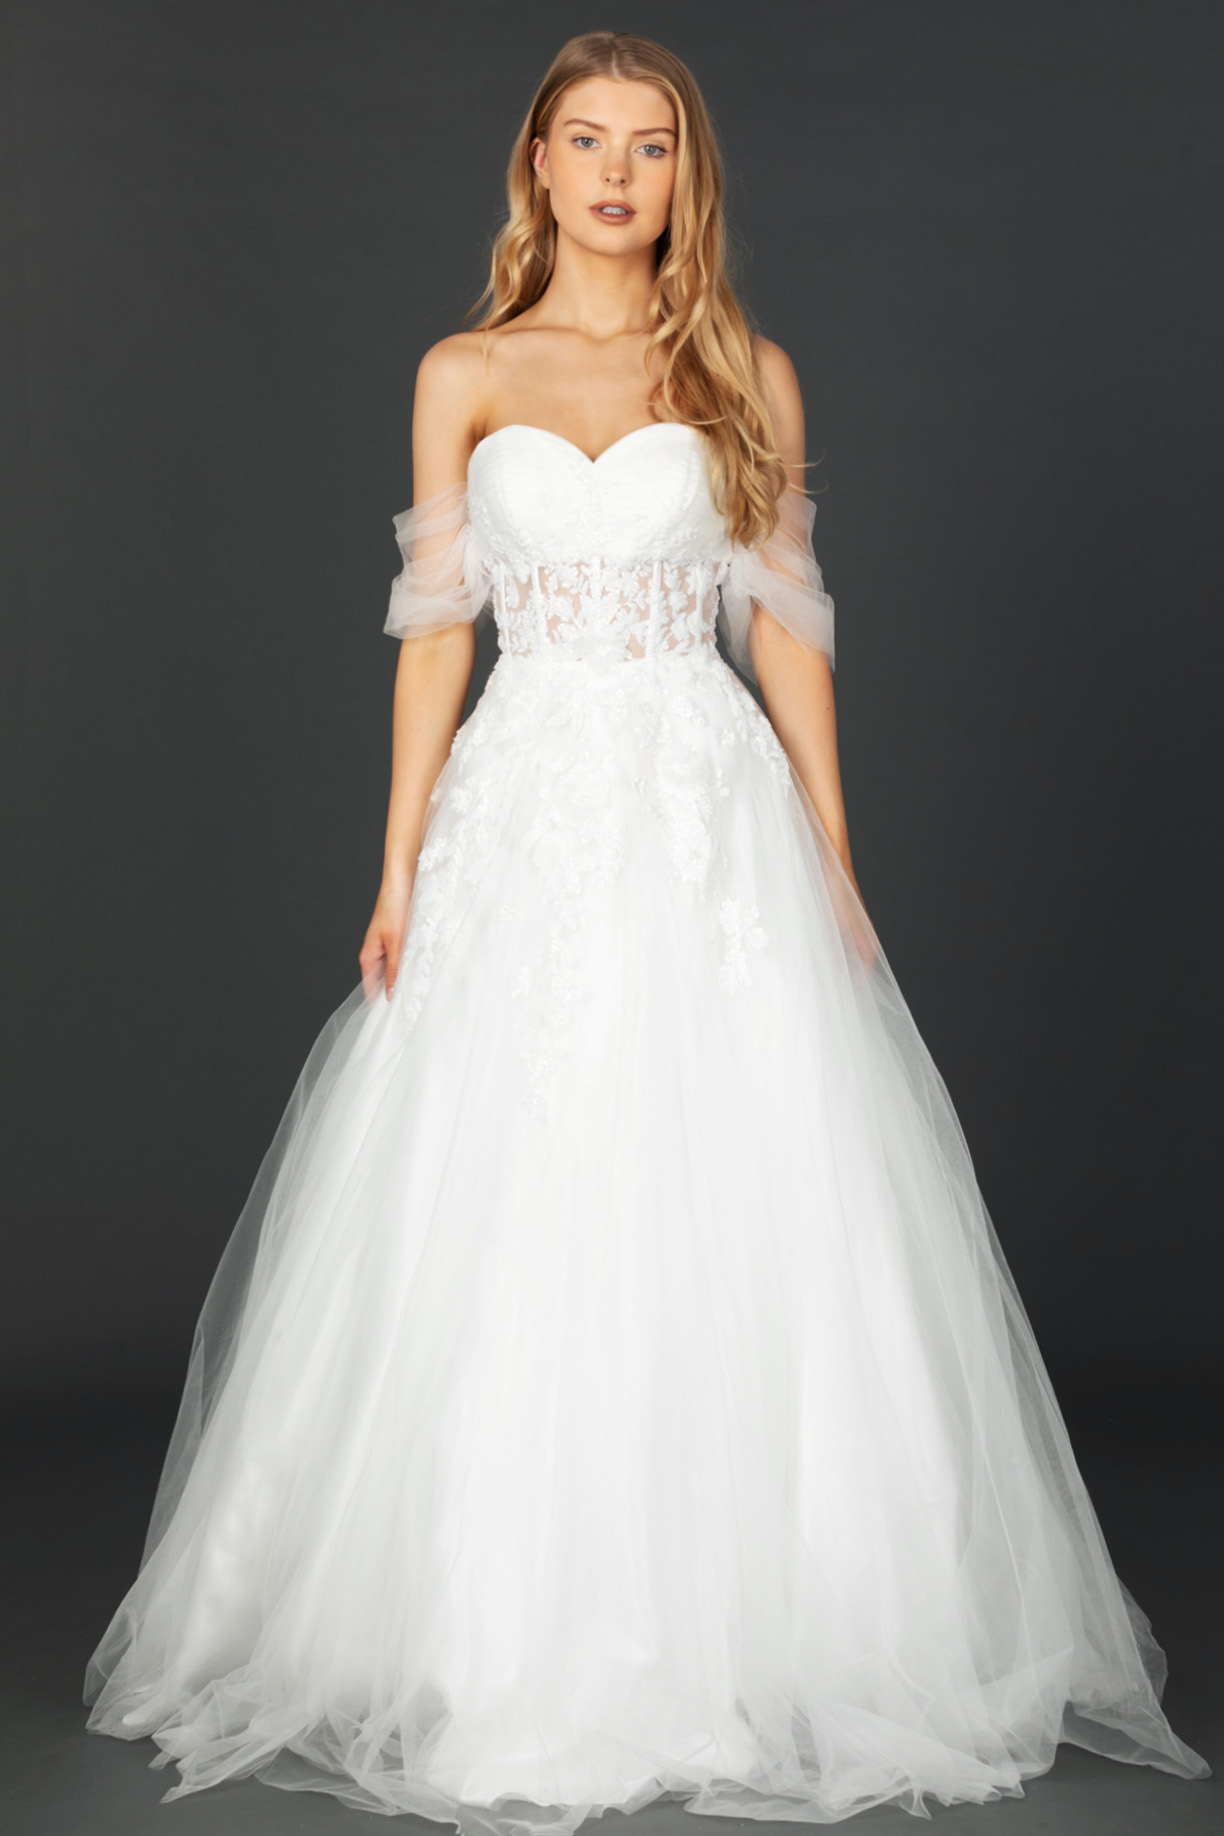 OFF SHOULDER, SWEETHEART, BALL GOWN